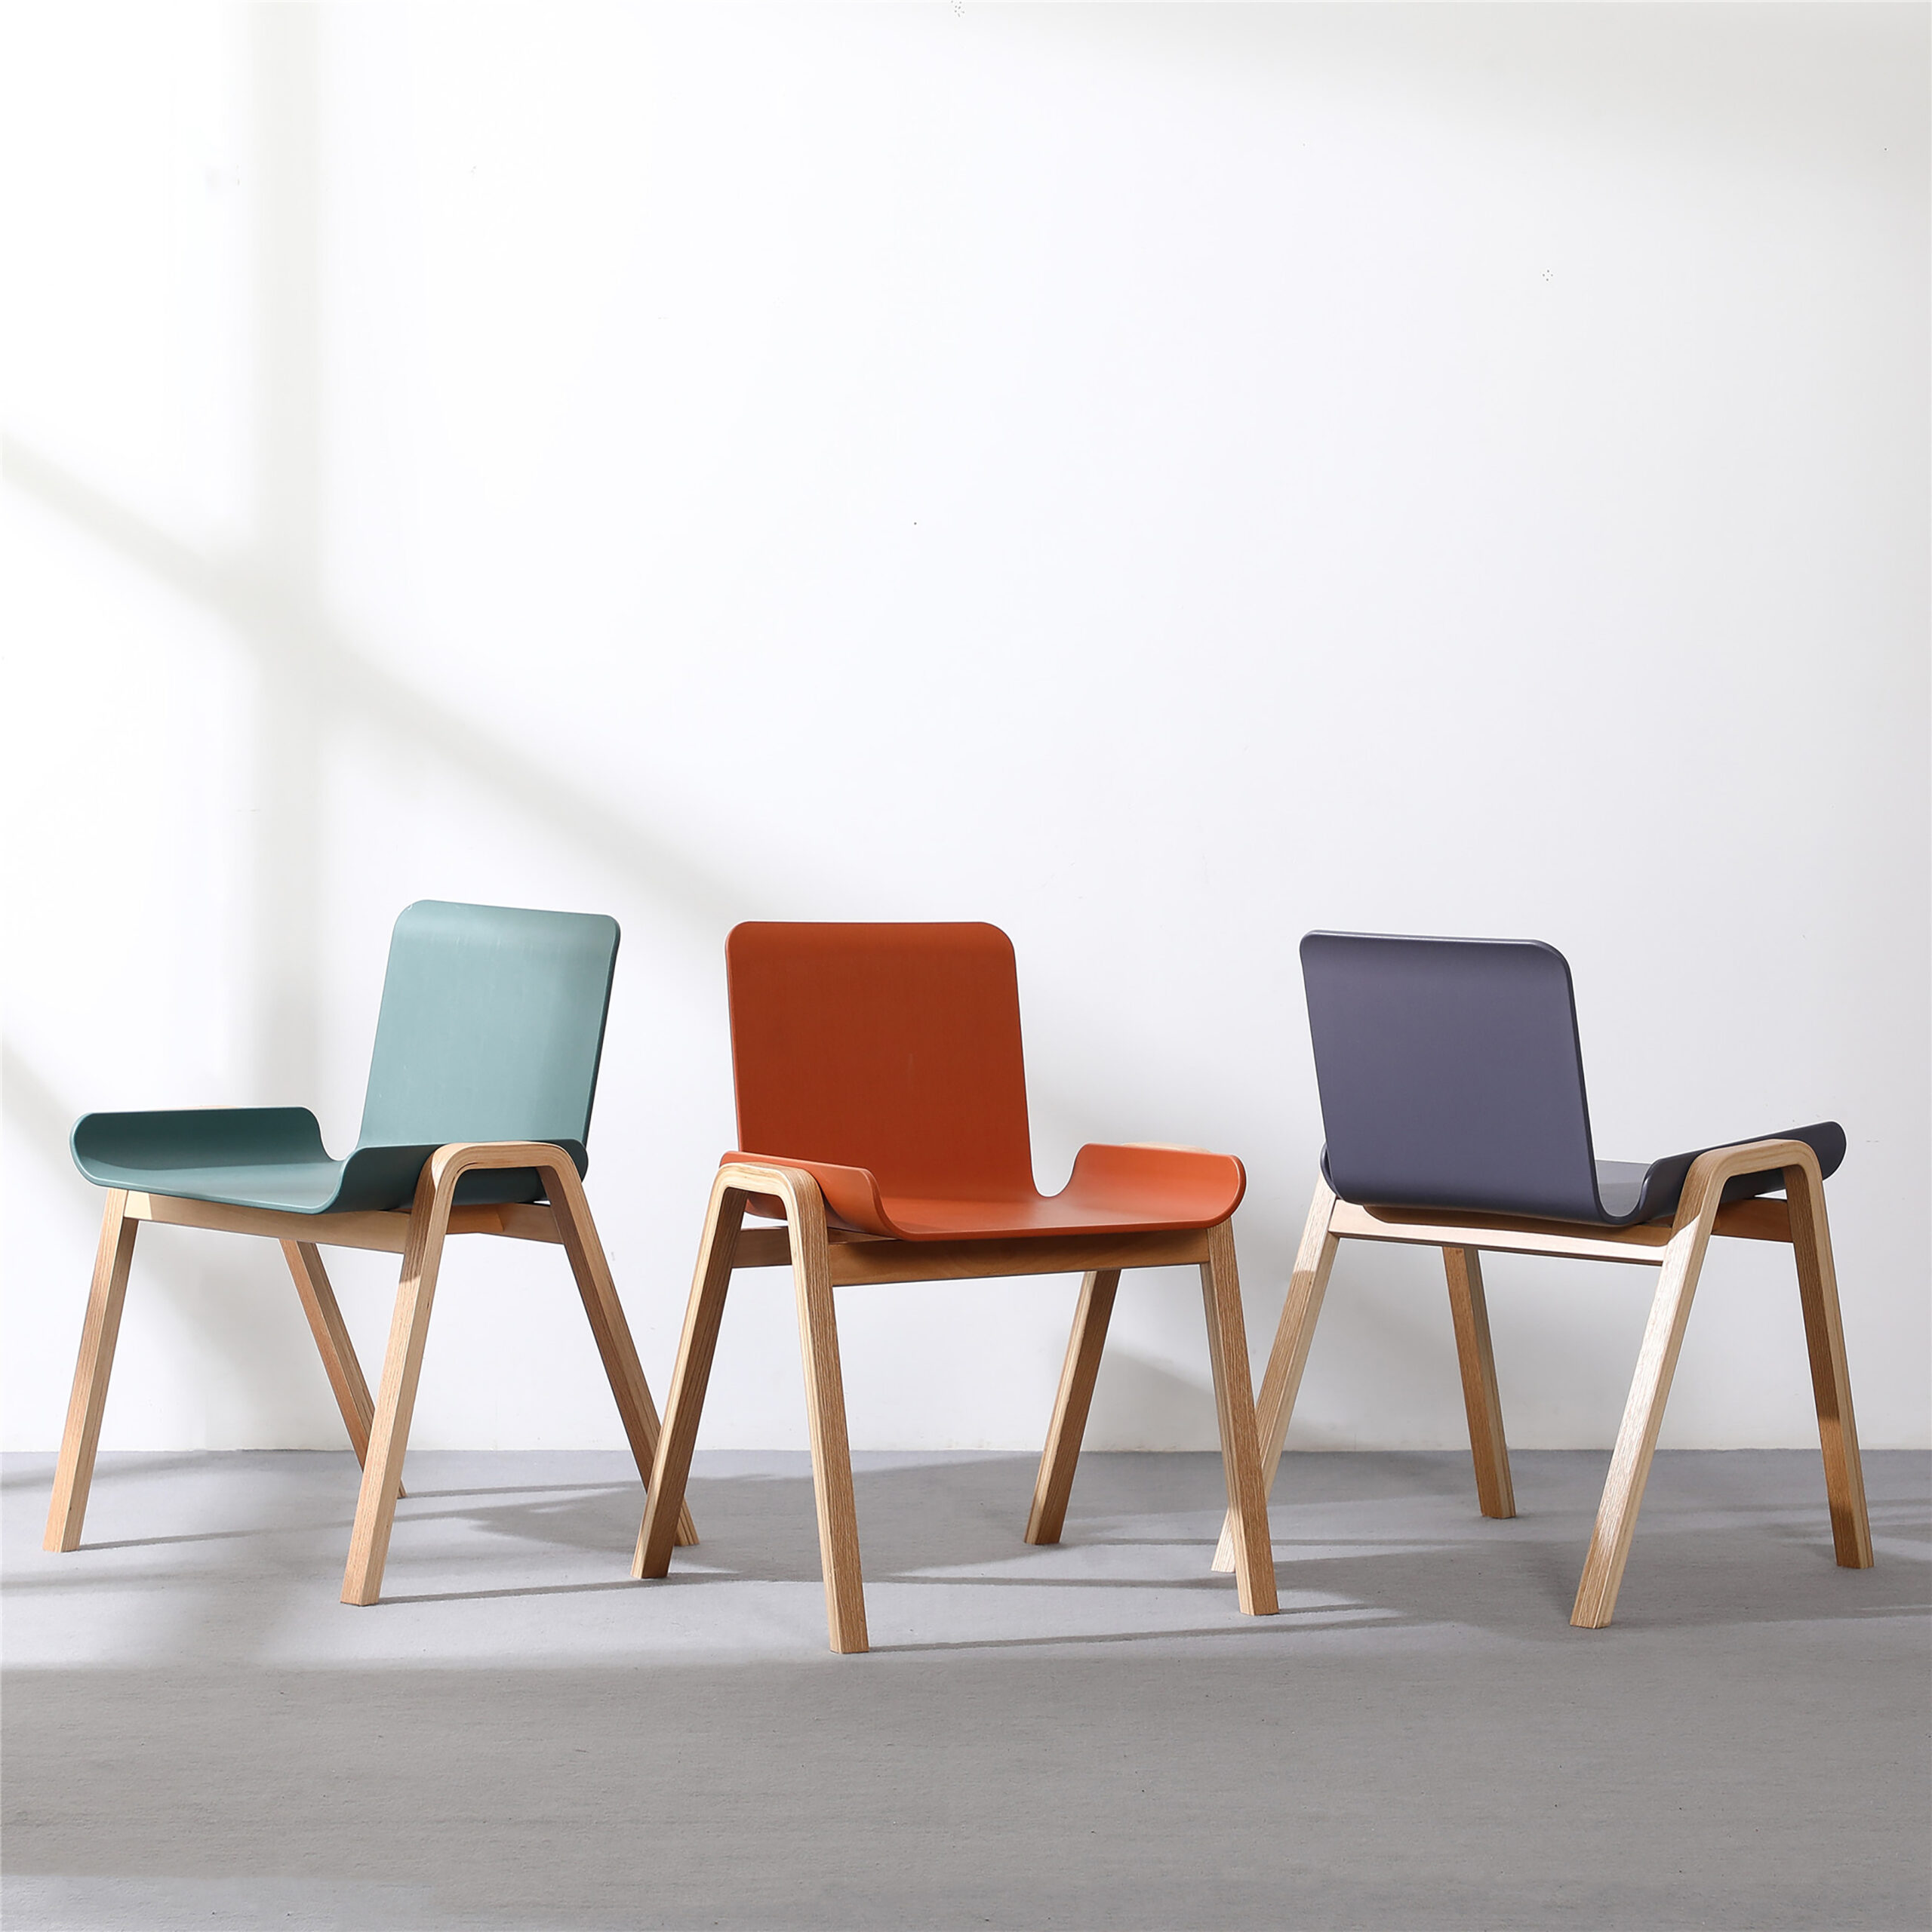 3 identical chairs sit around each other in different colors